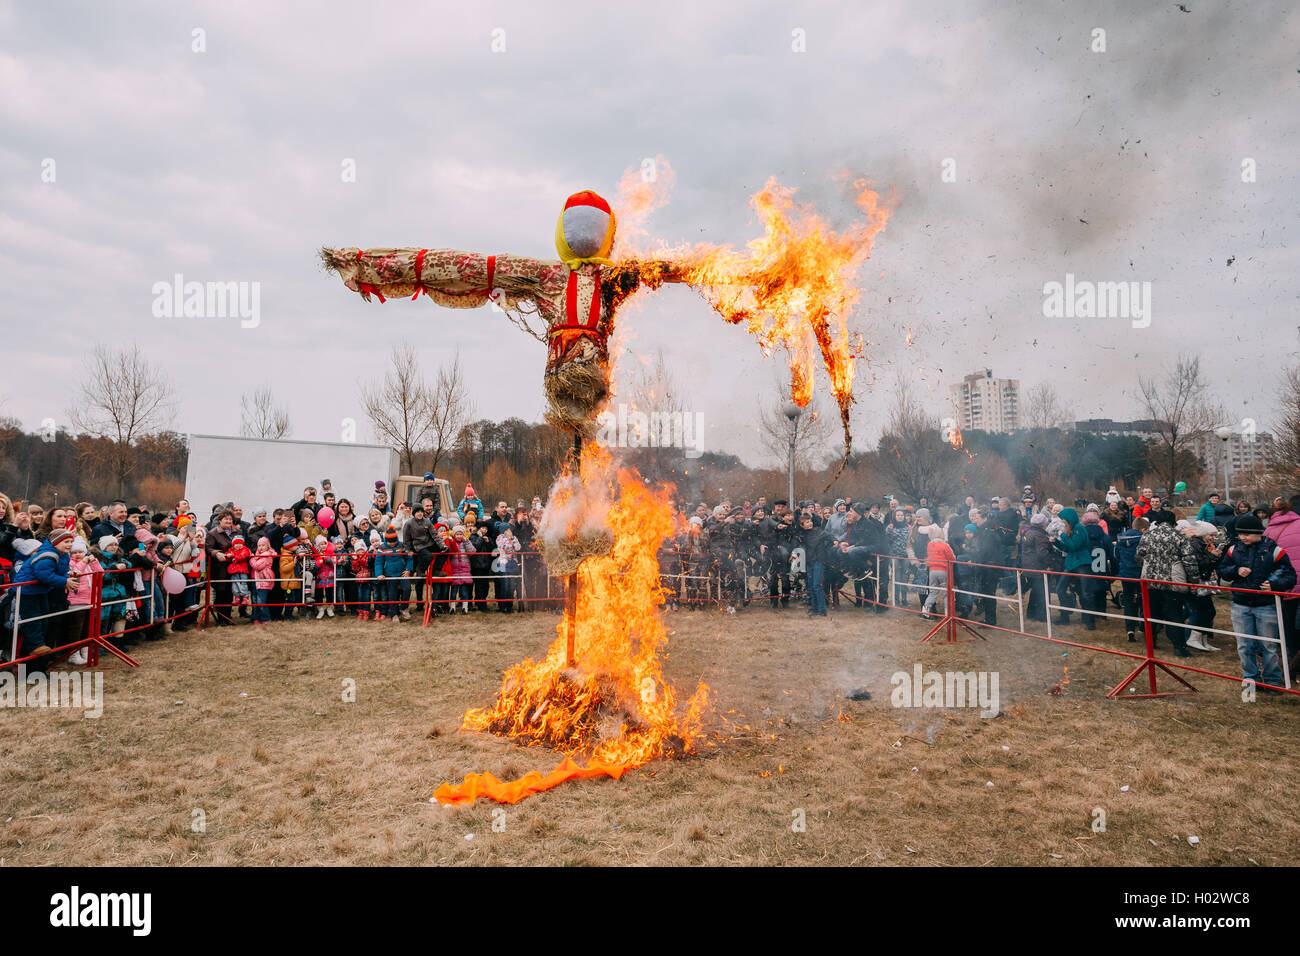 Gomel, Belarus - March 12, 2016: The Scene Of Burning On Bonfire The Dummy As Winter And Death Symbol In Slavic Mythology, Pagan Stock Photo